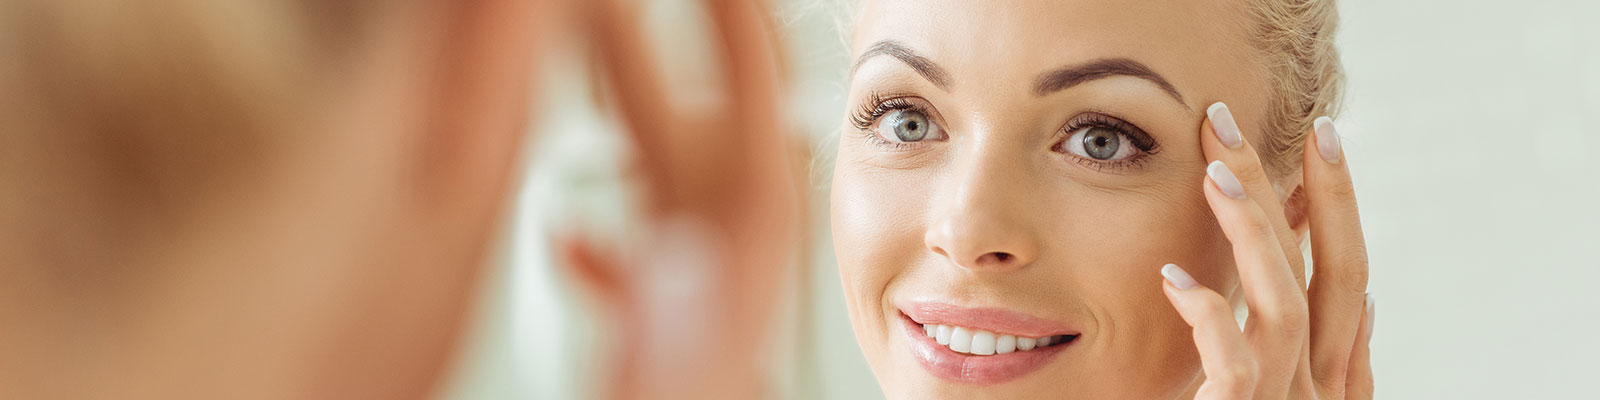 Enjoy youthful-looking eyes with Restylane Eyelight injections